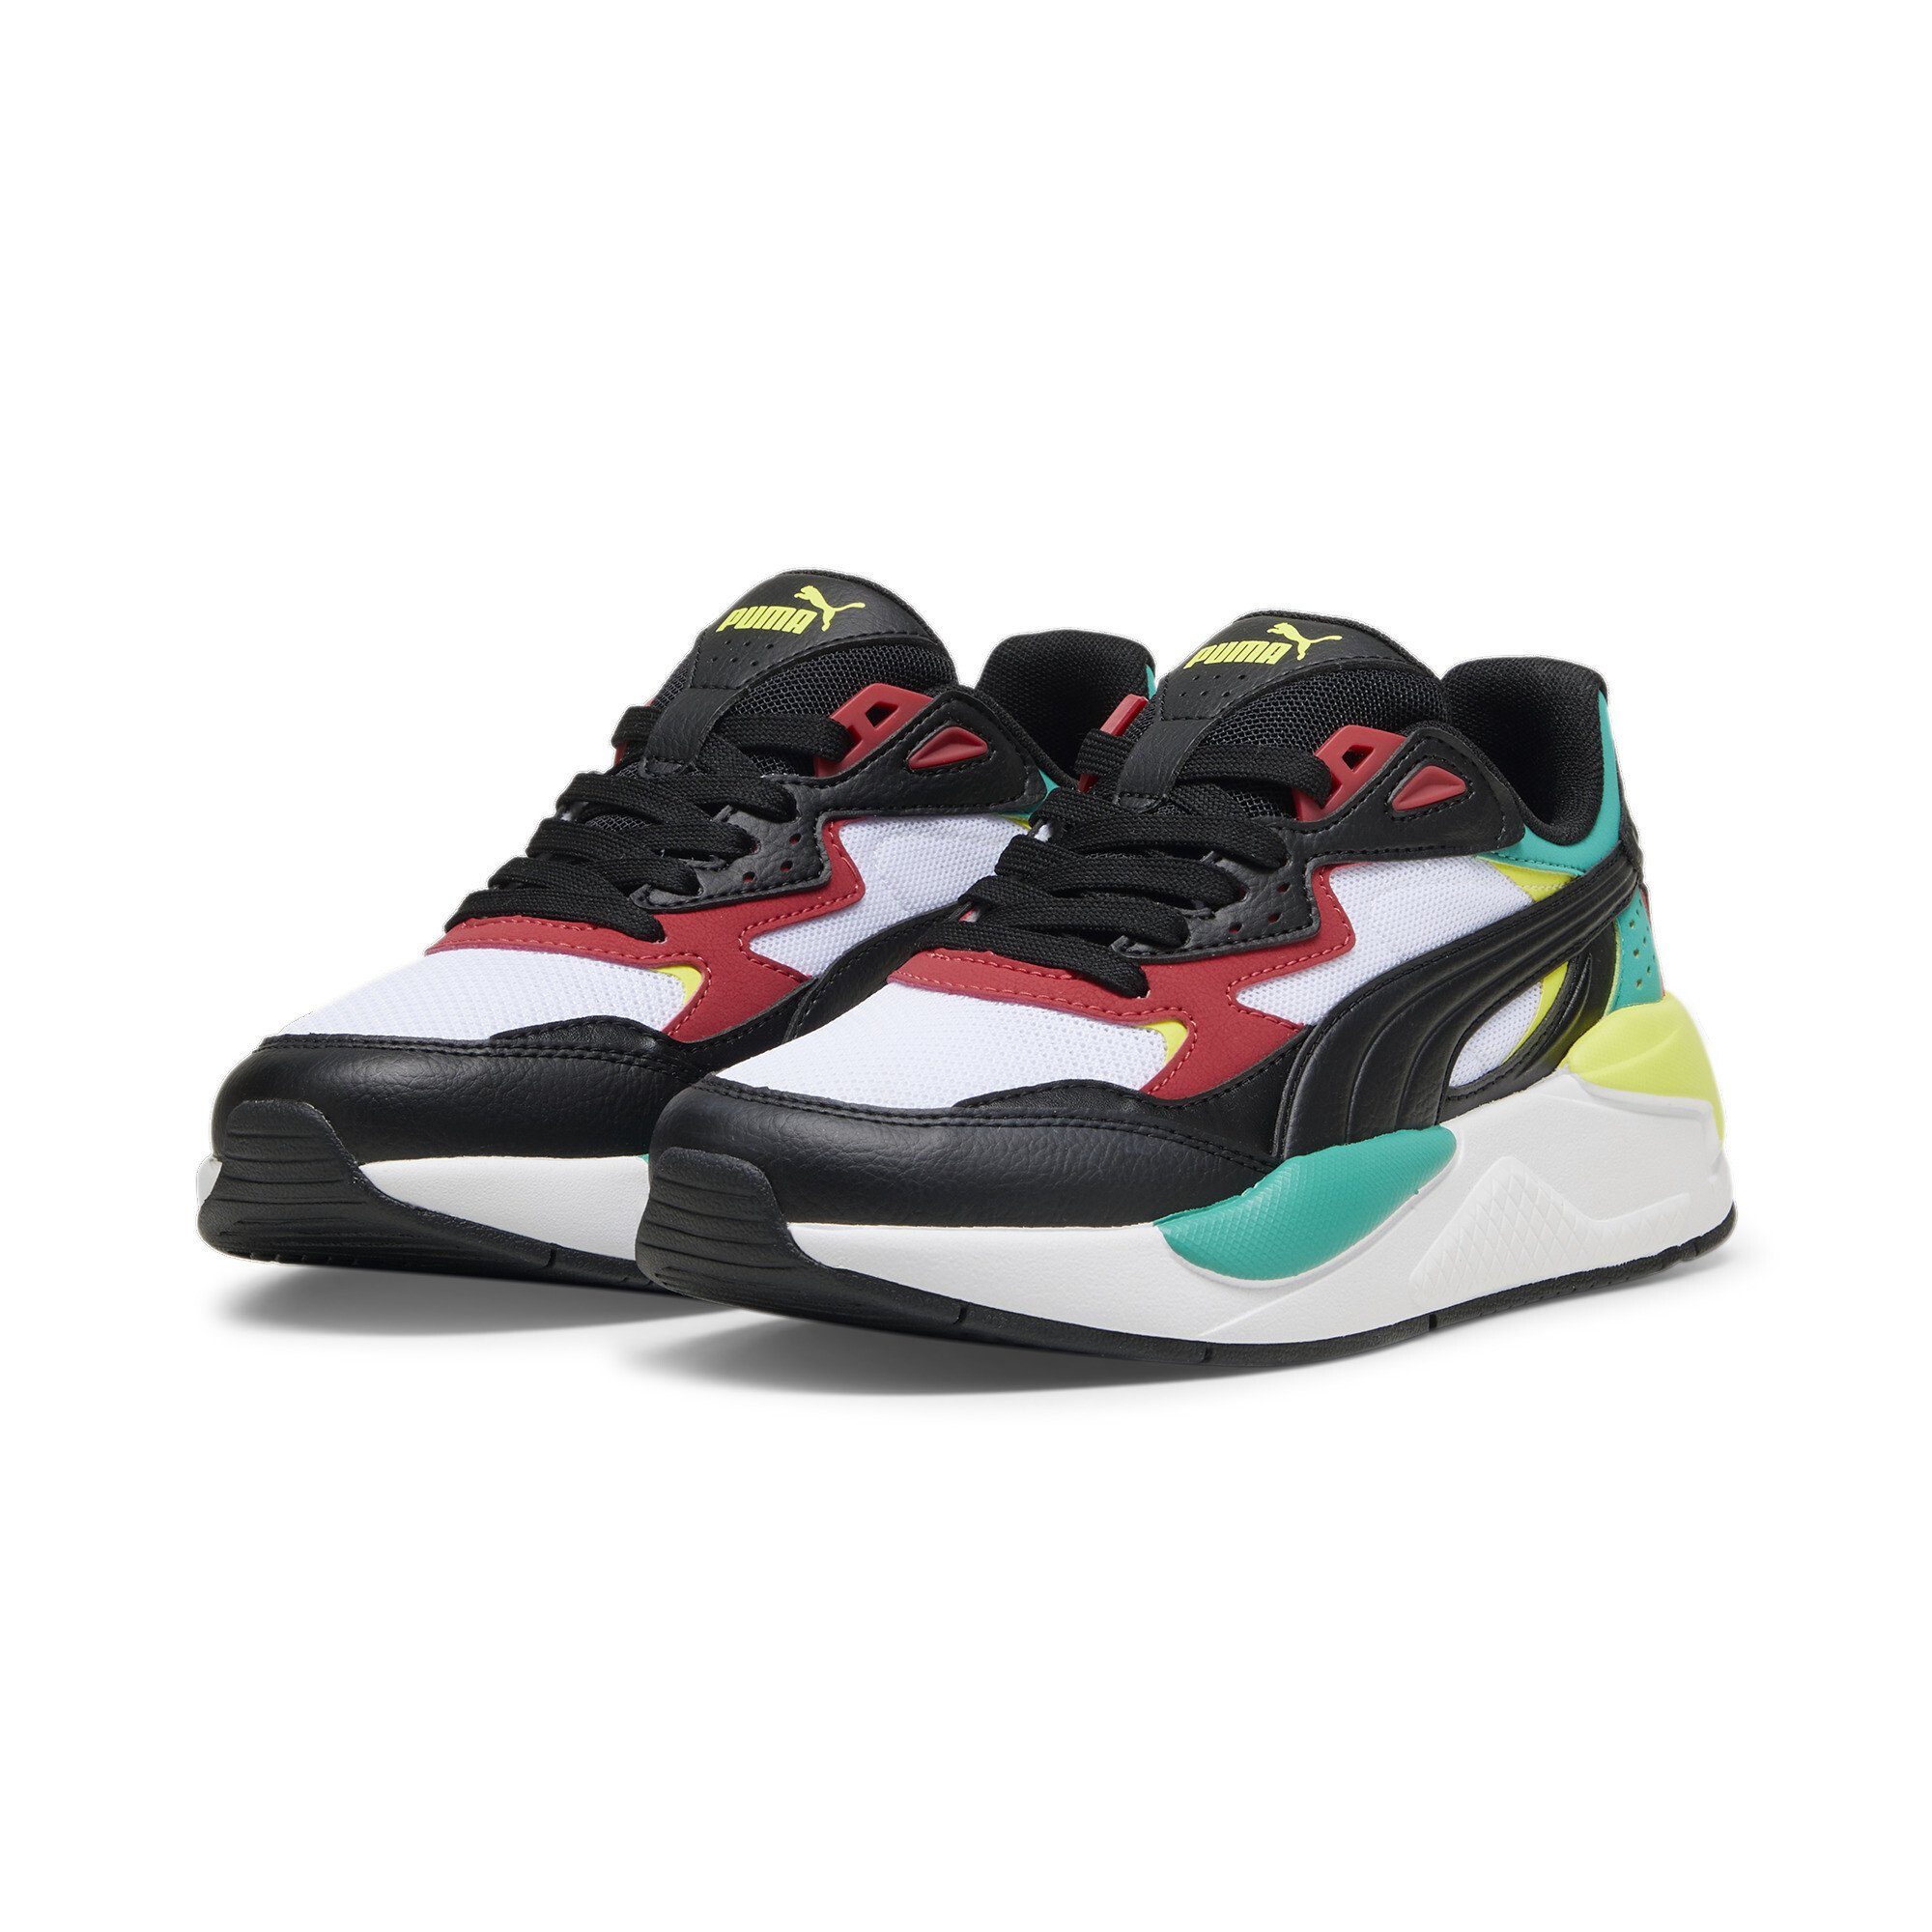 PUMA X-Ray Speed Sneakers Jugendliche Sneaker White Black Club Red Sparkling Green | Sneaker low